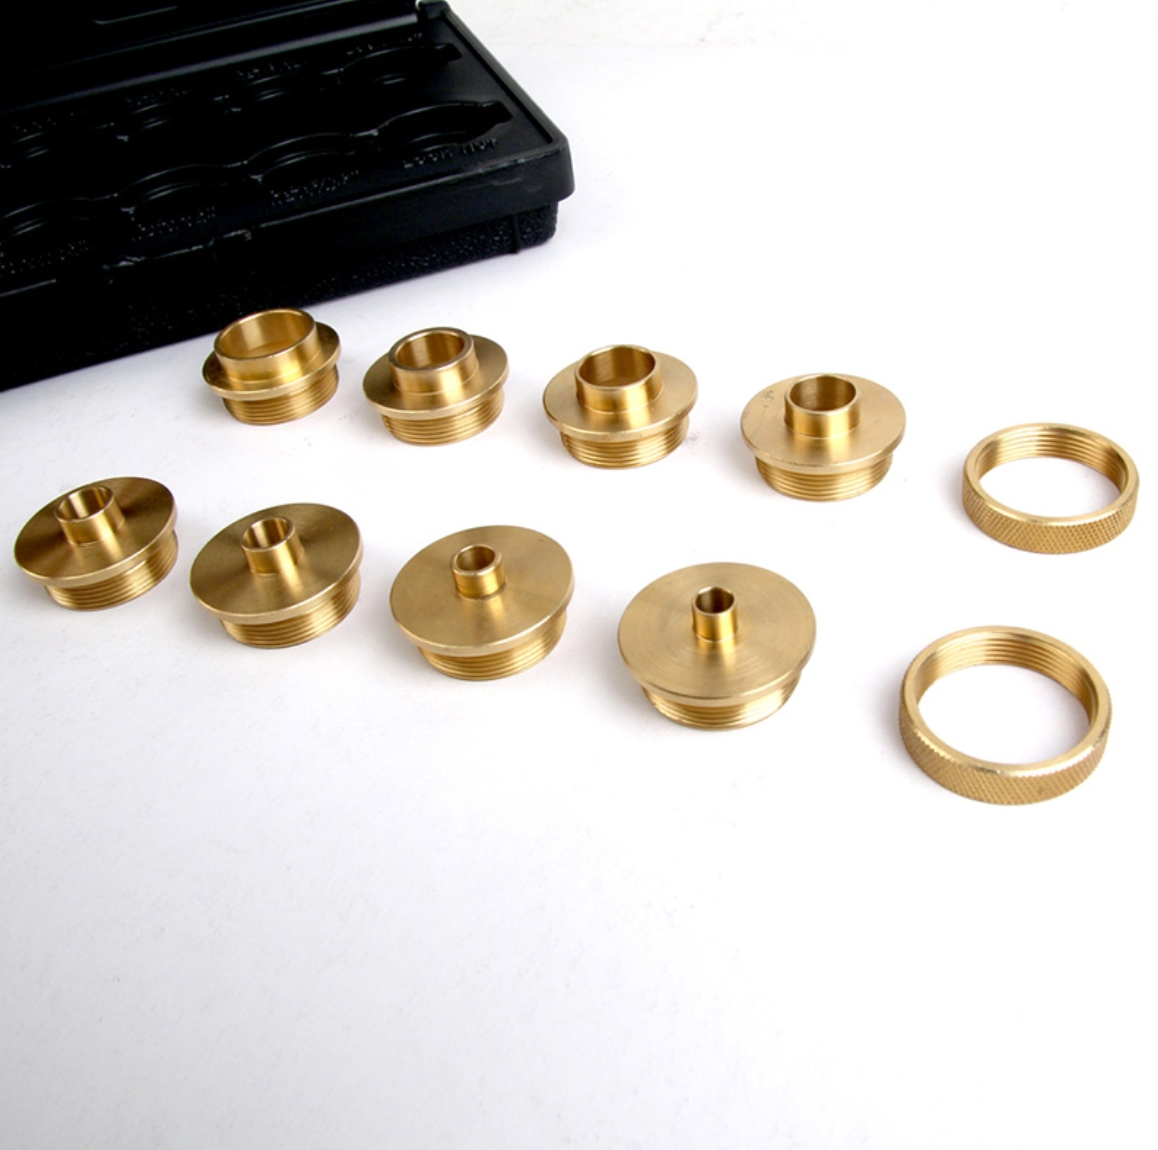 Brass Router Guide Bushings for Template Work